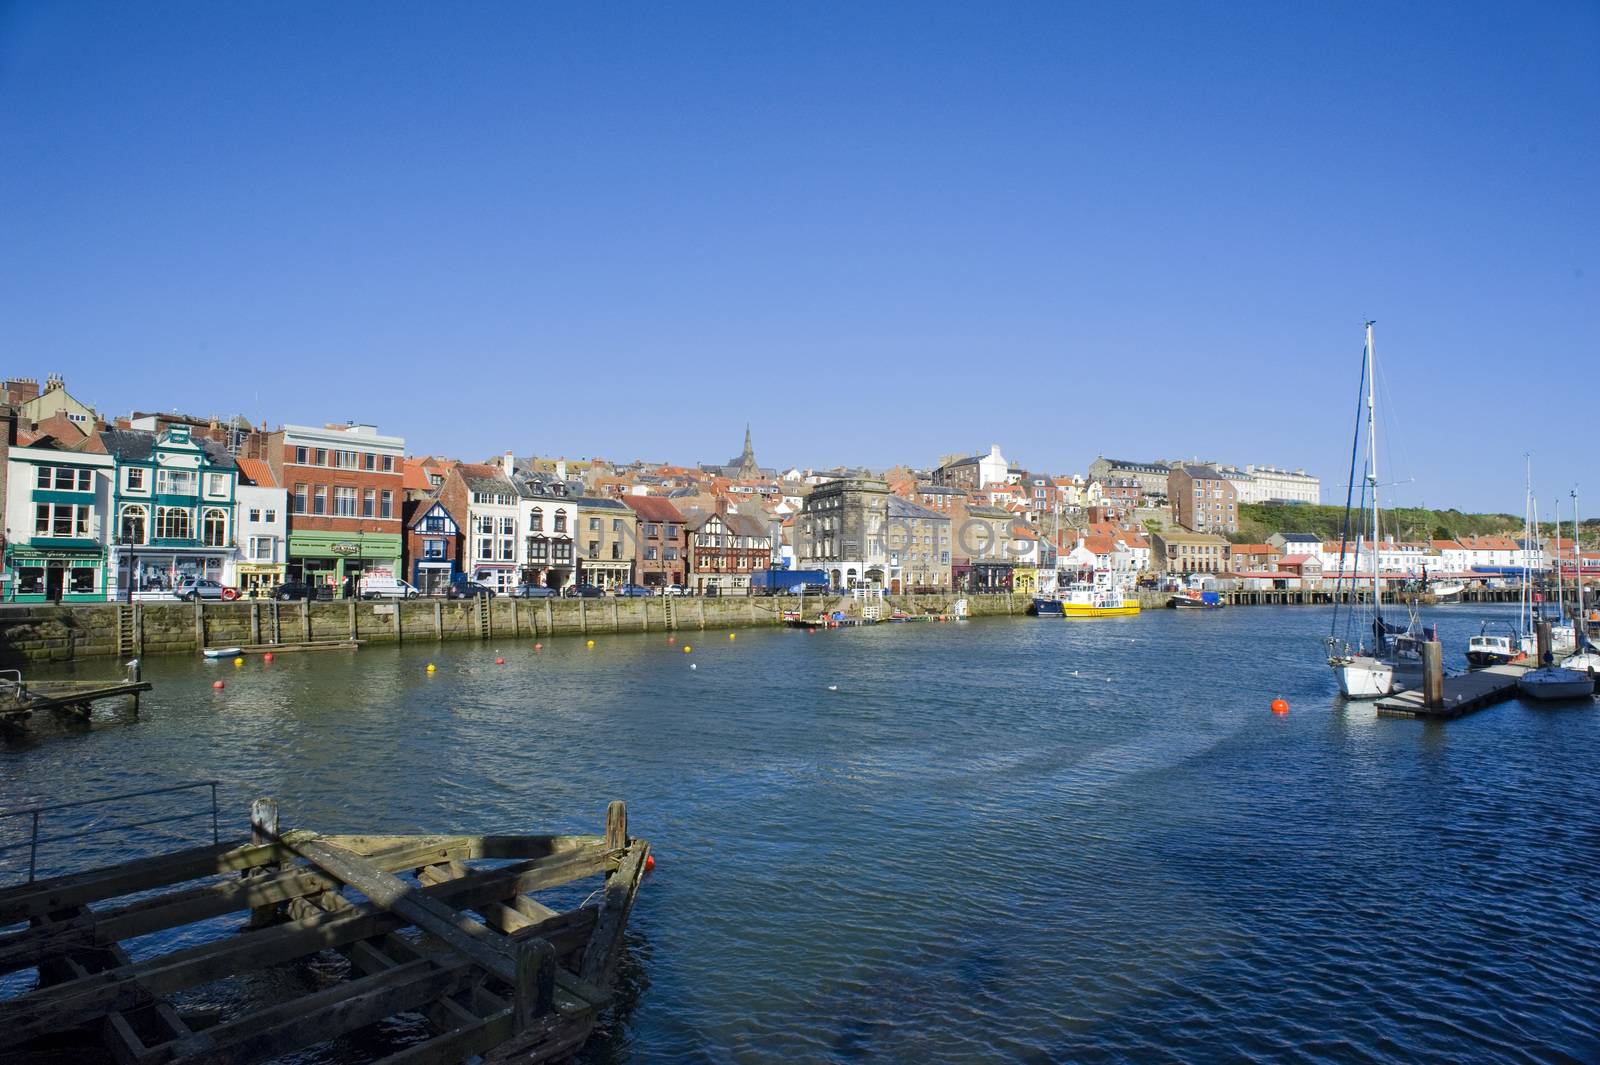 Middle Harbour, Whitby, North Yorkshire with the waterfront buildings and fishing quays on the banks of the River Esk